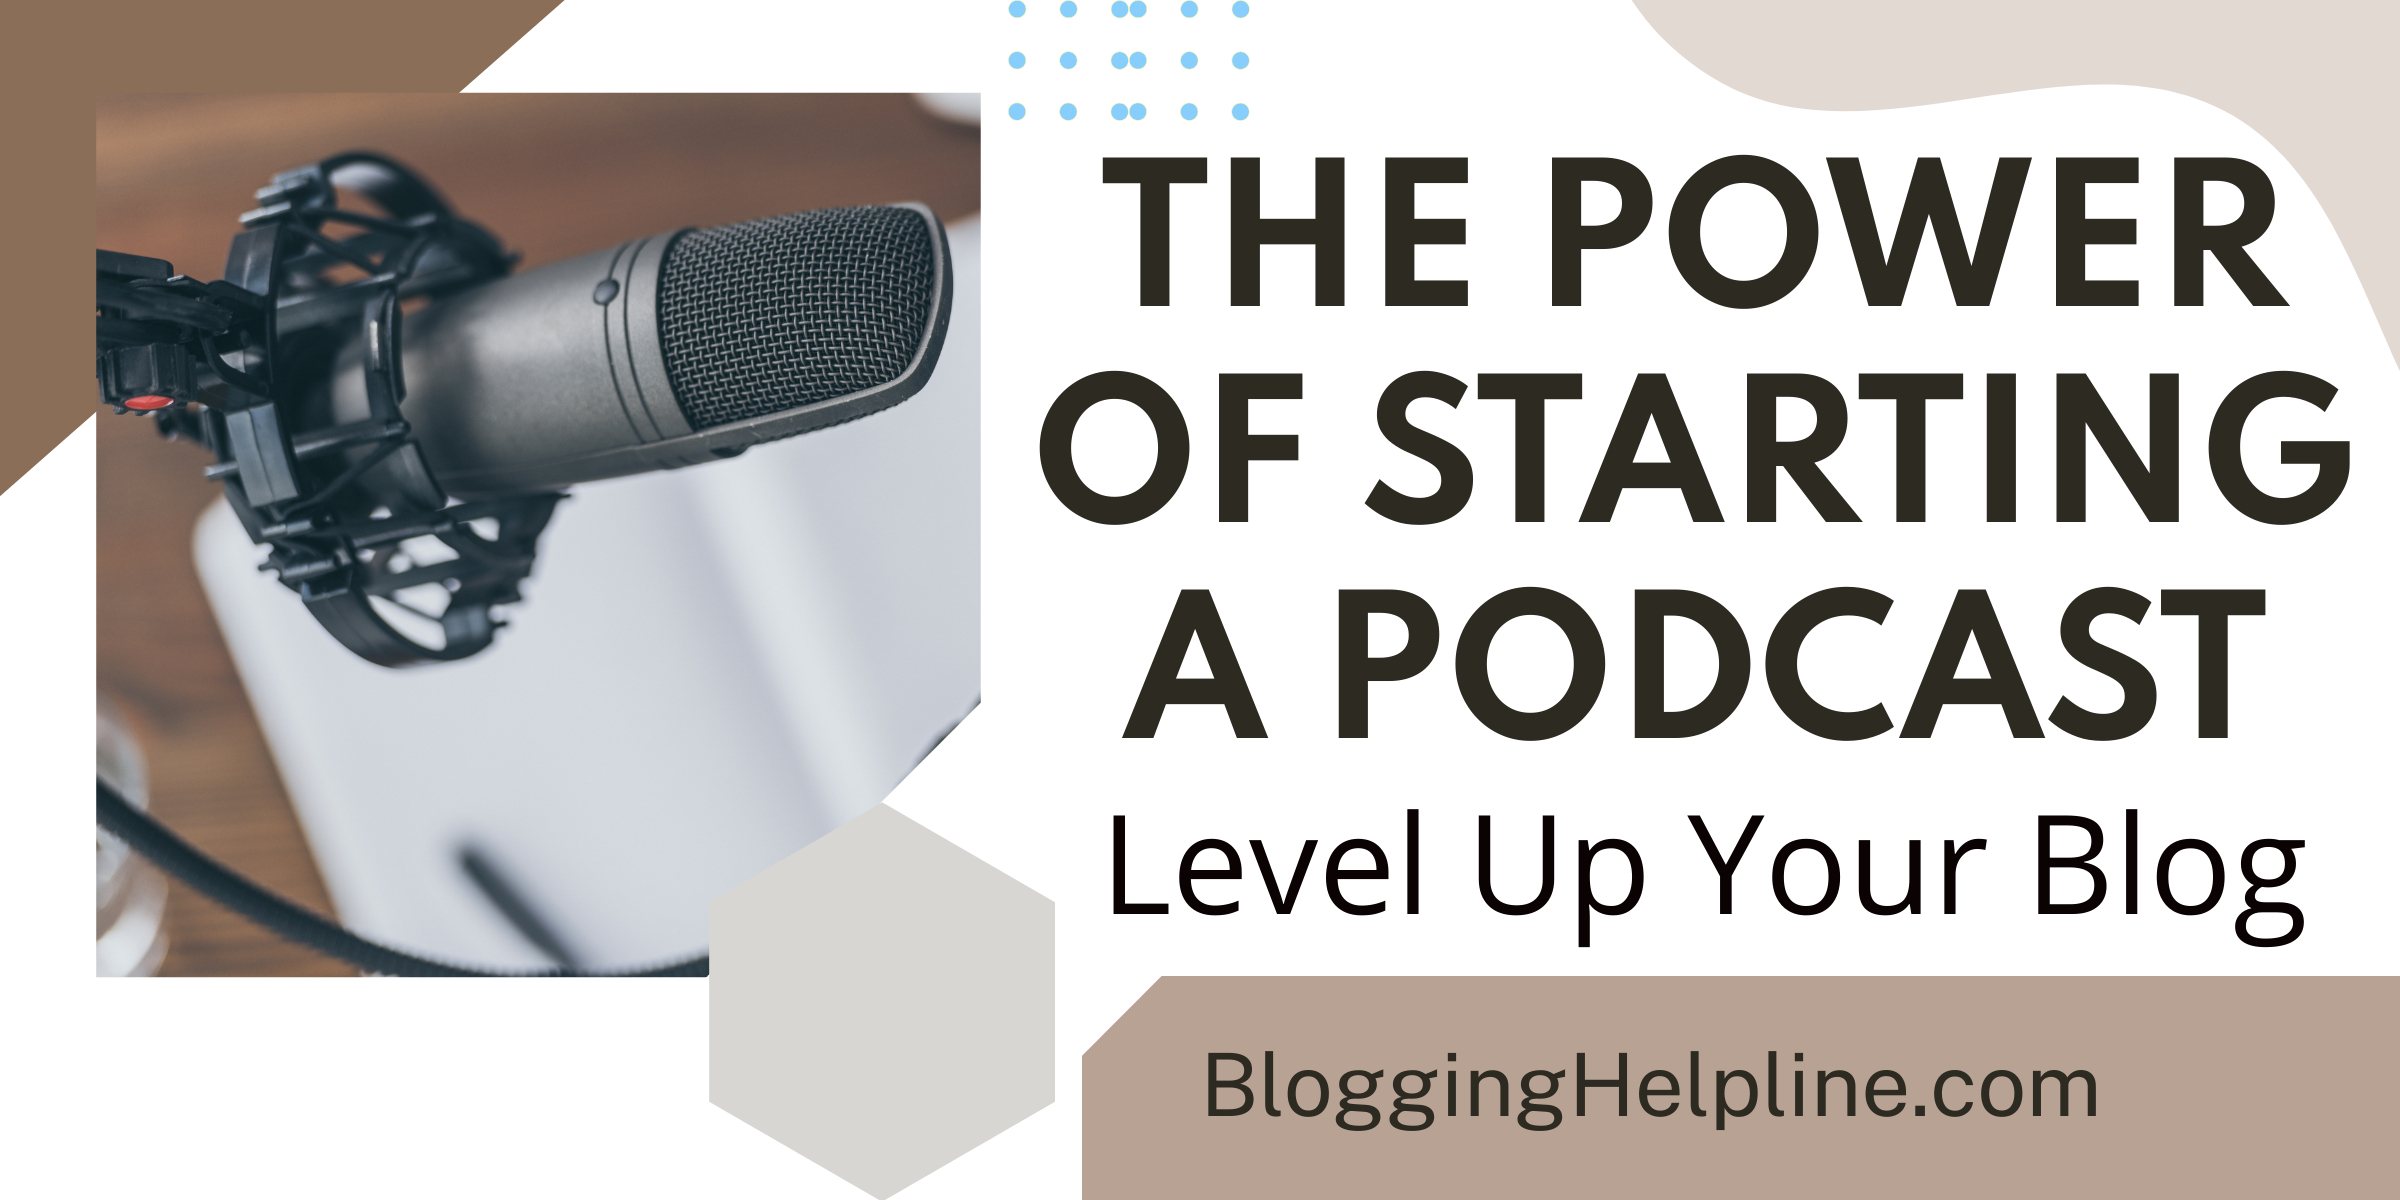 Level Up Your Blog The Power of Starting a Podcast